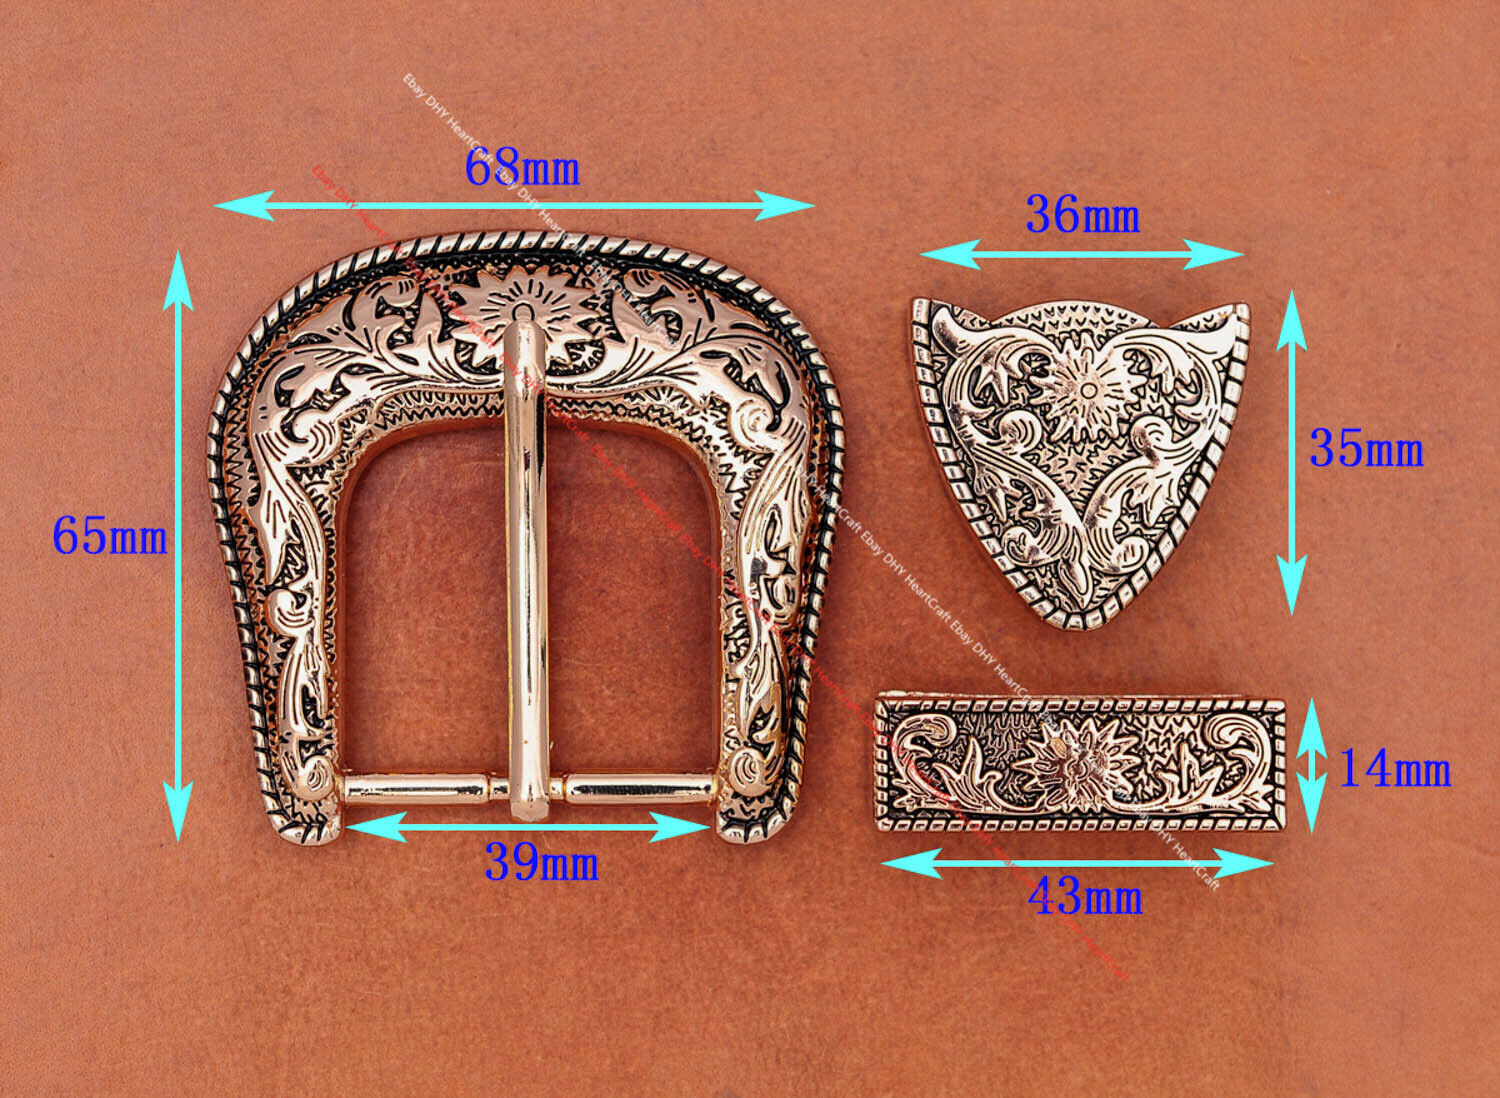 Heavy Gold Western Cowboy Belt Buckle 3 Piece Set Floral Carved Unisex 1-1/2" Unbranded Does not apply - фотография #10